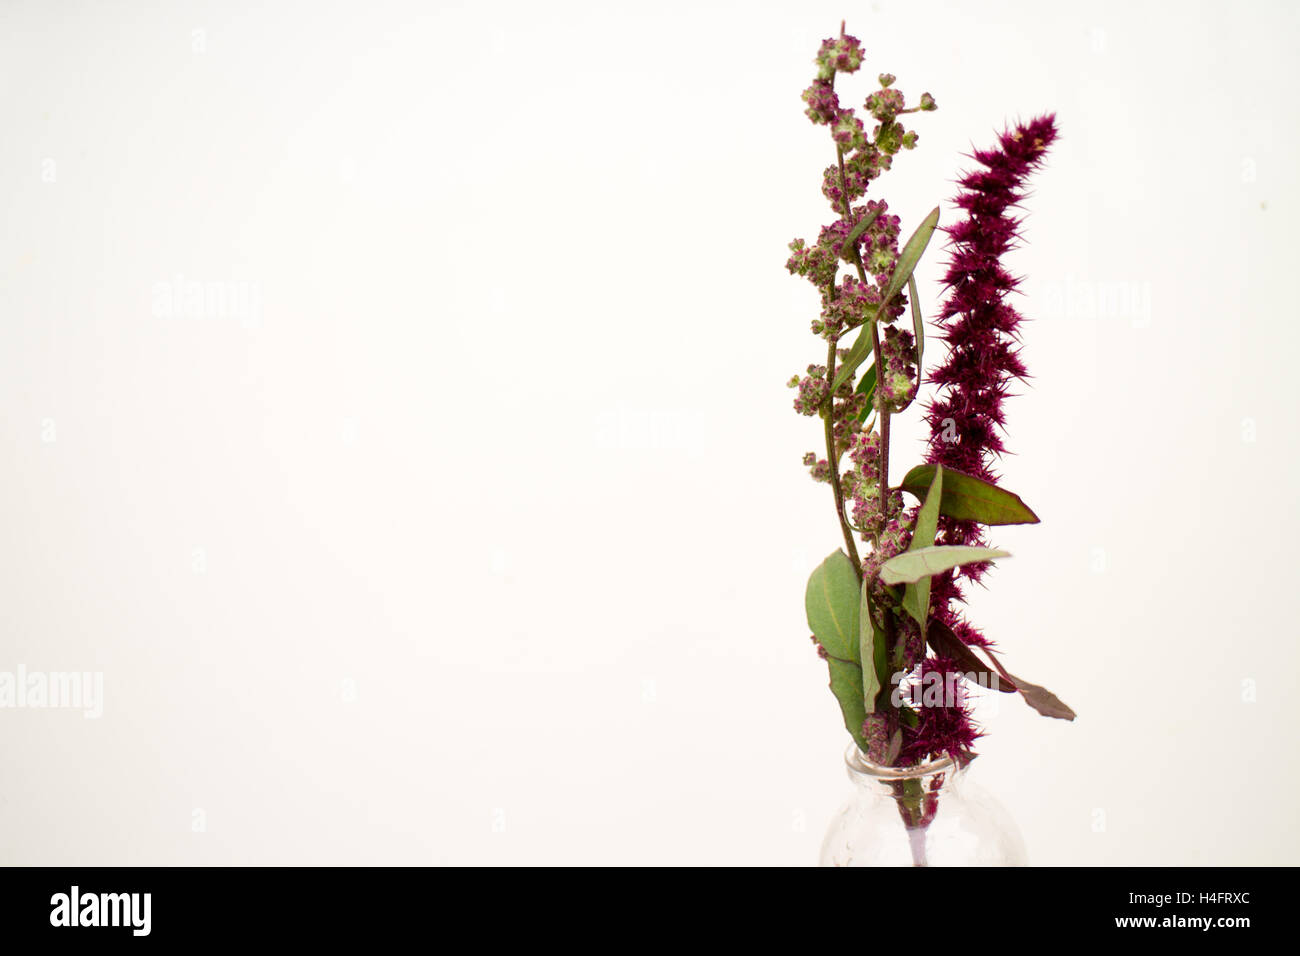 Amaranth going to seed that looks like flowers, farm inspired Stock Photo